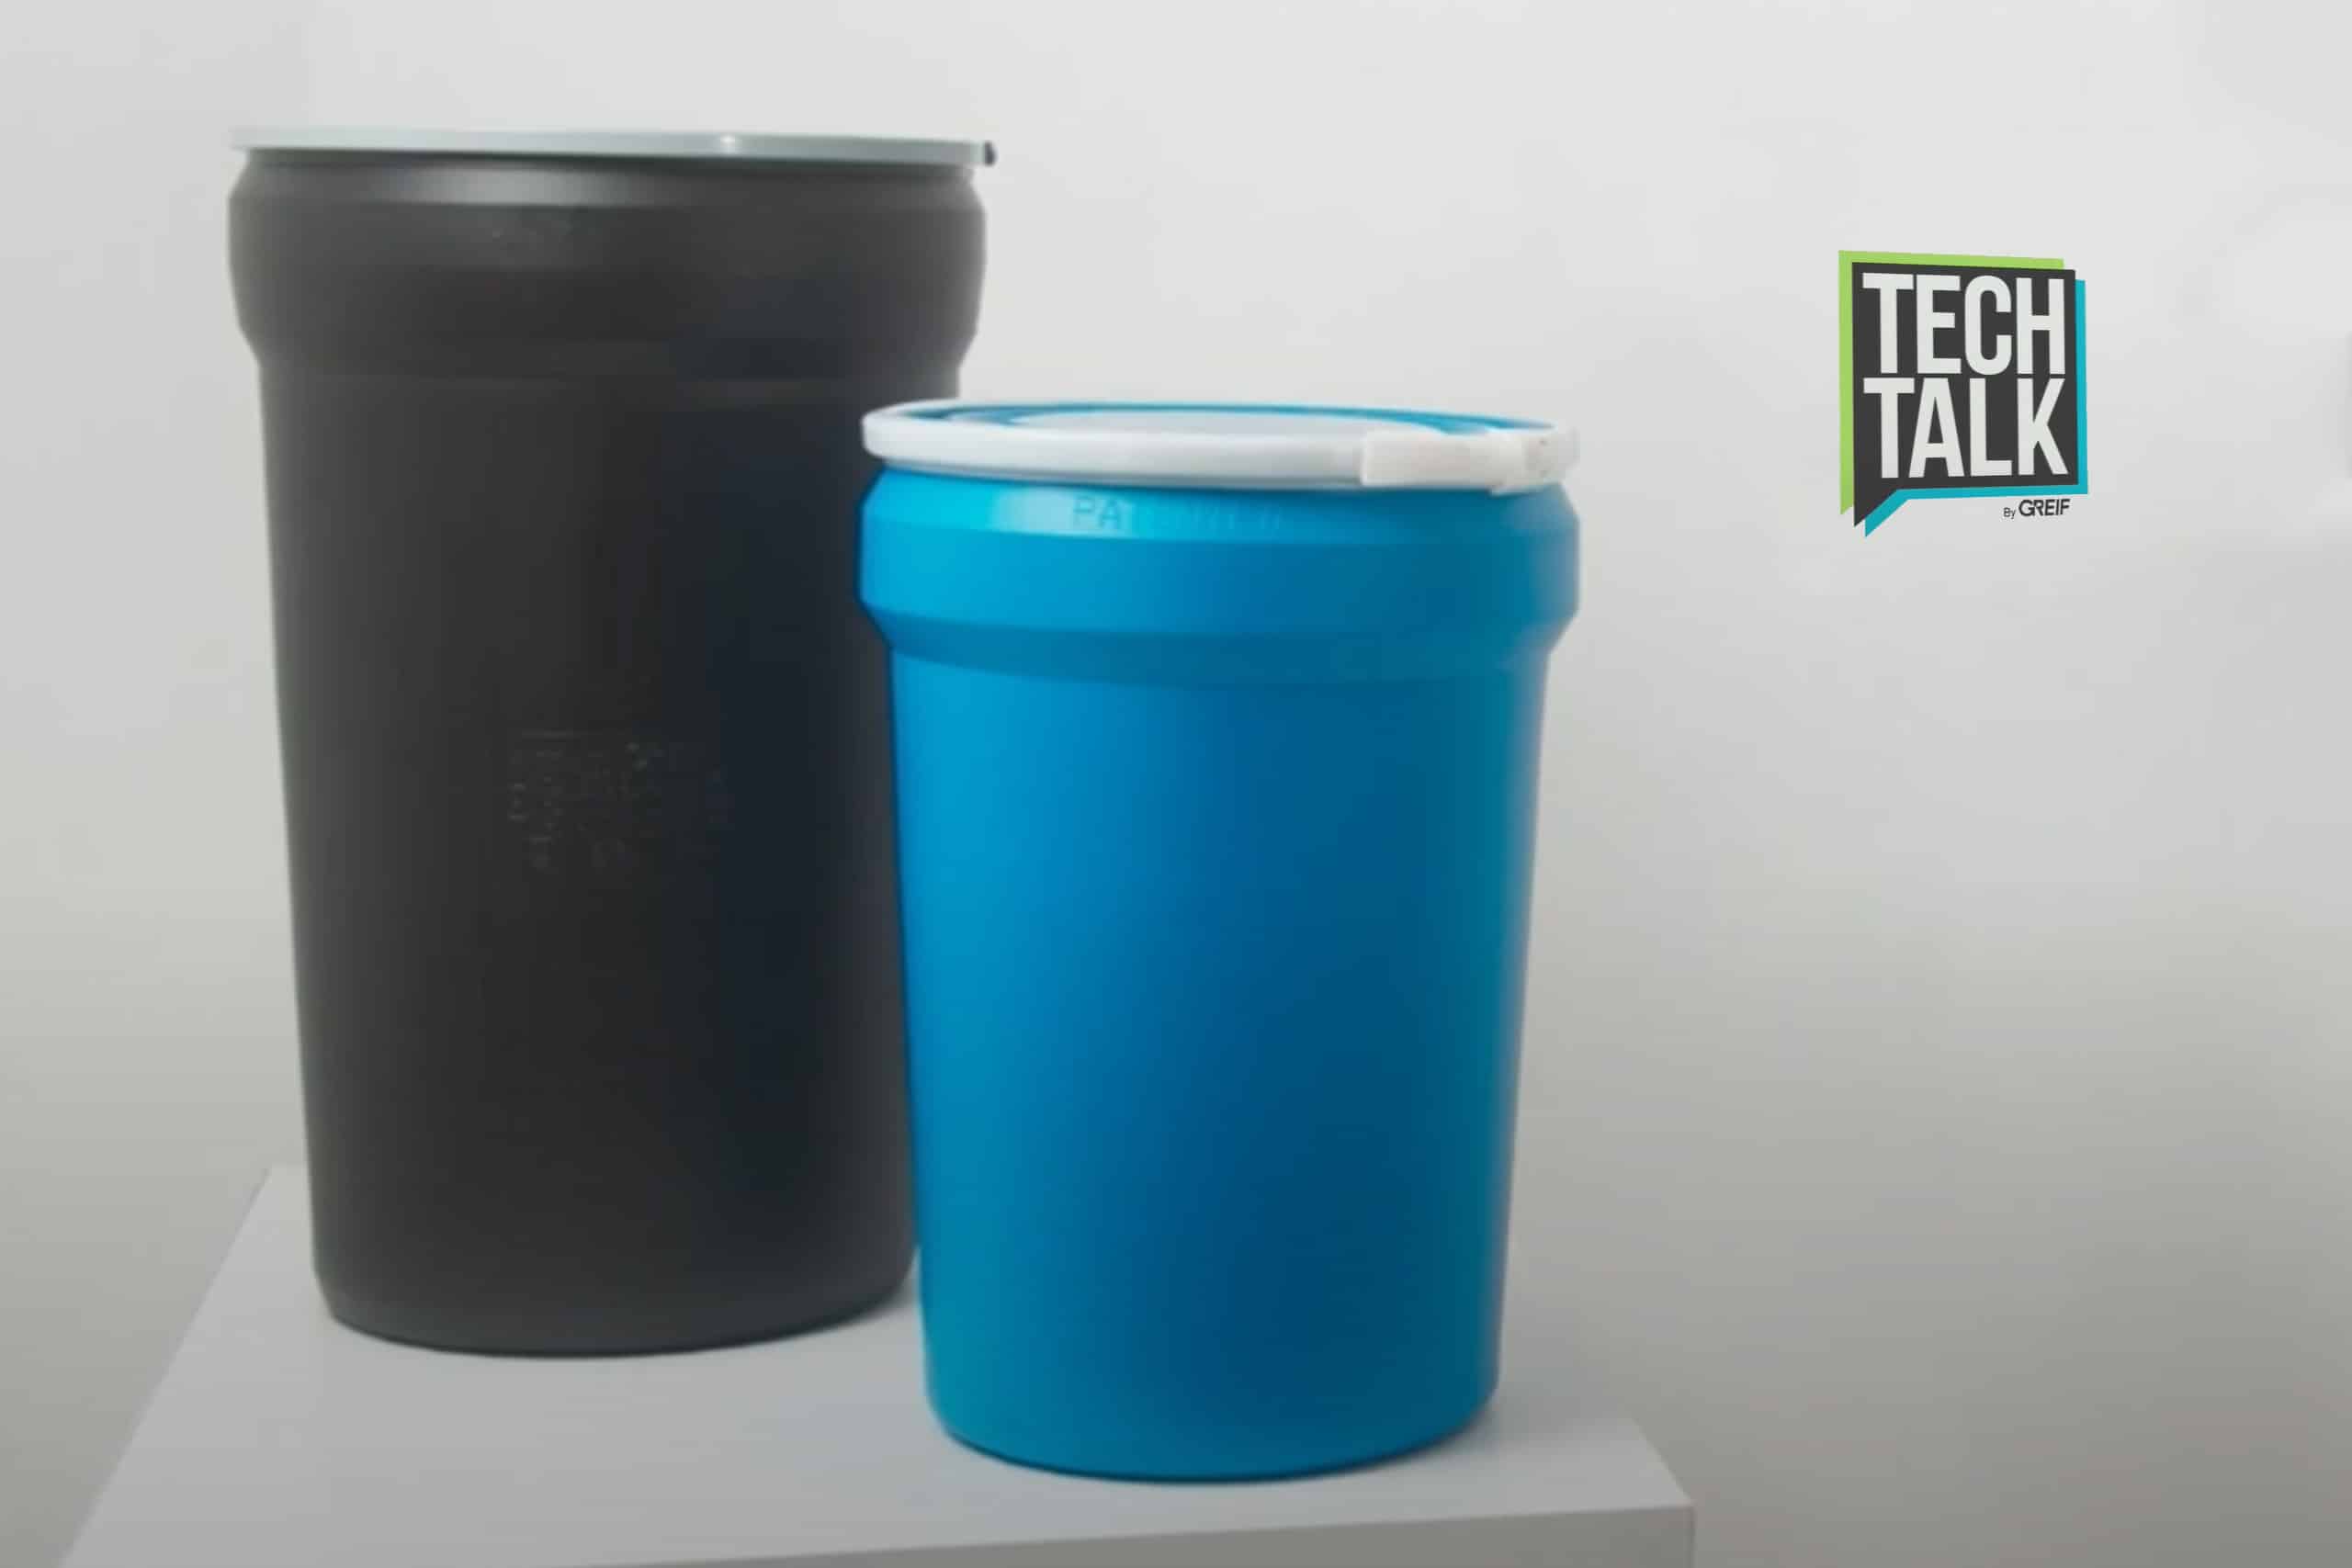 tech talk cover image for tapered plastic drum showing two variables